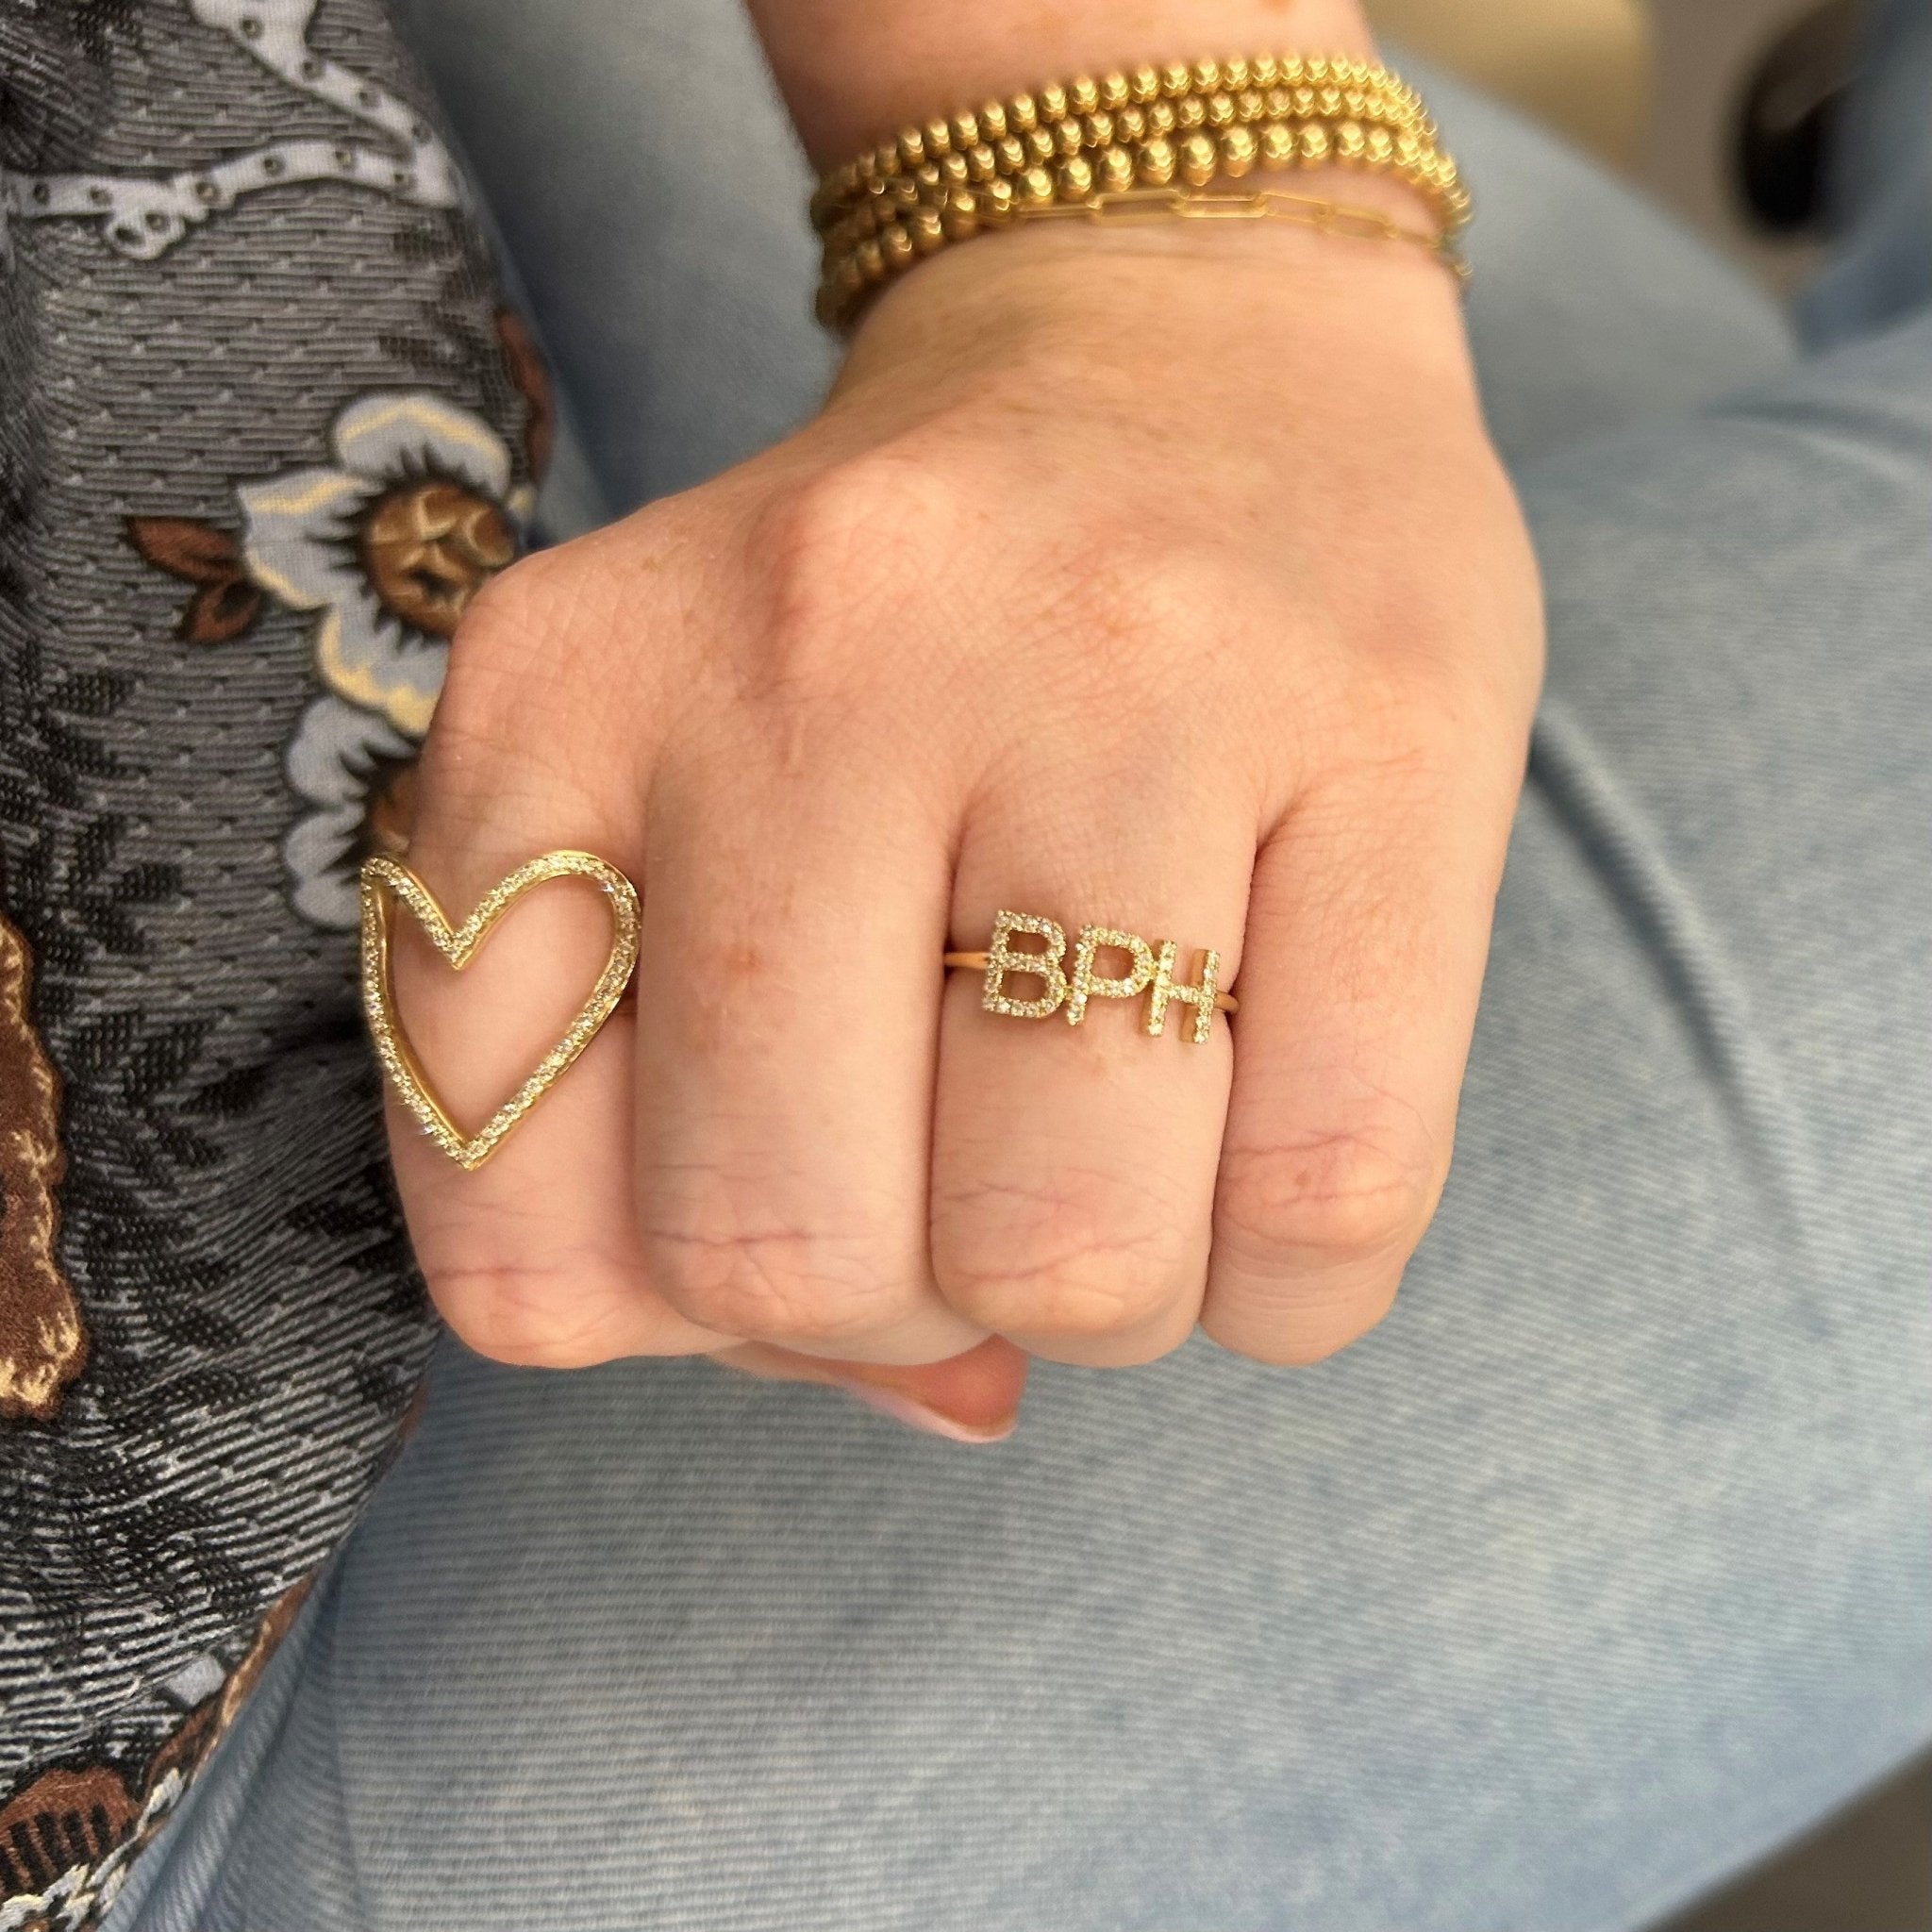 Three Name Ring - Personalized Ring for Mom | FARUZO